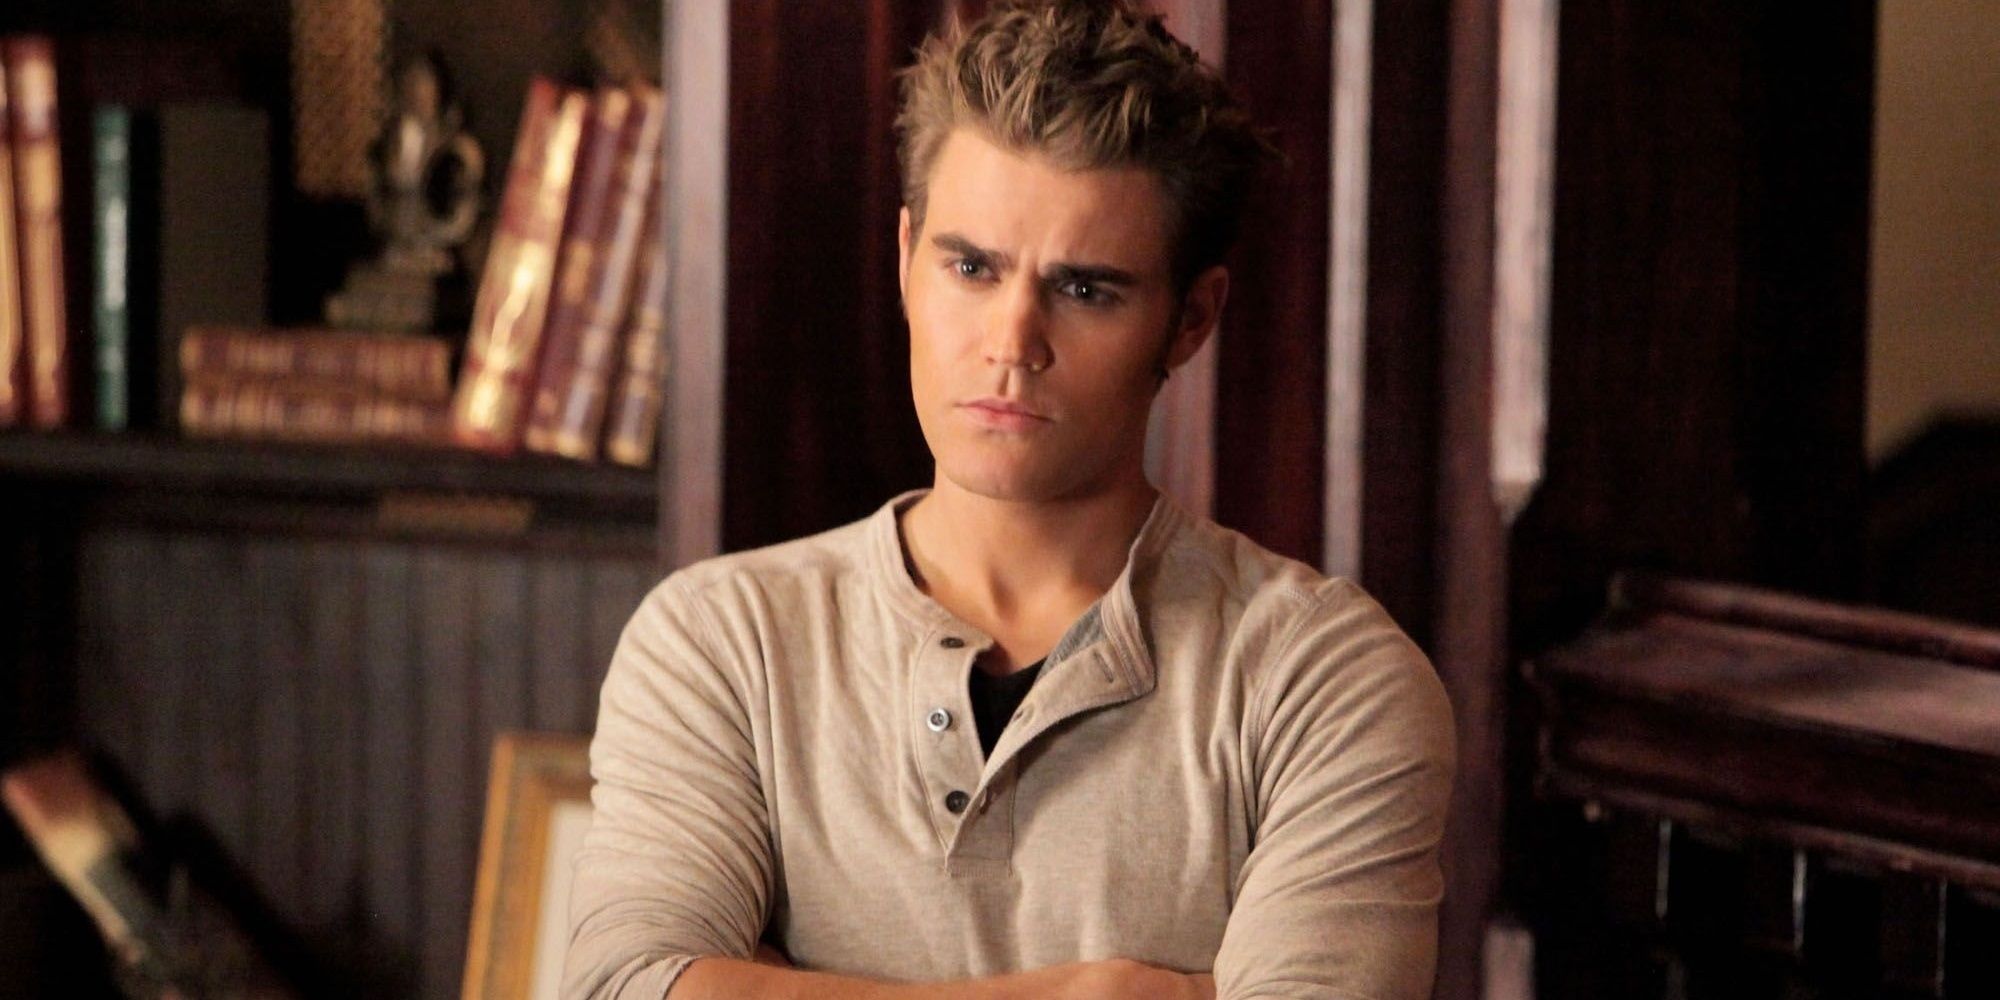 Stefan with his arms crossed in The Vampire Diaries.